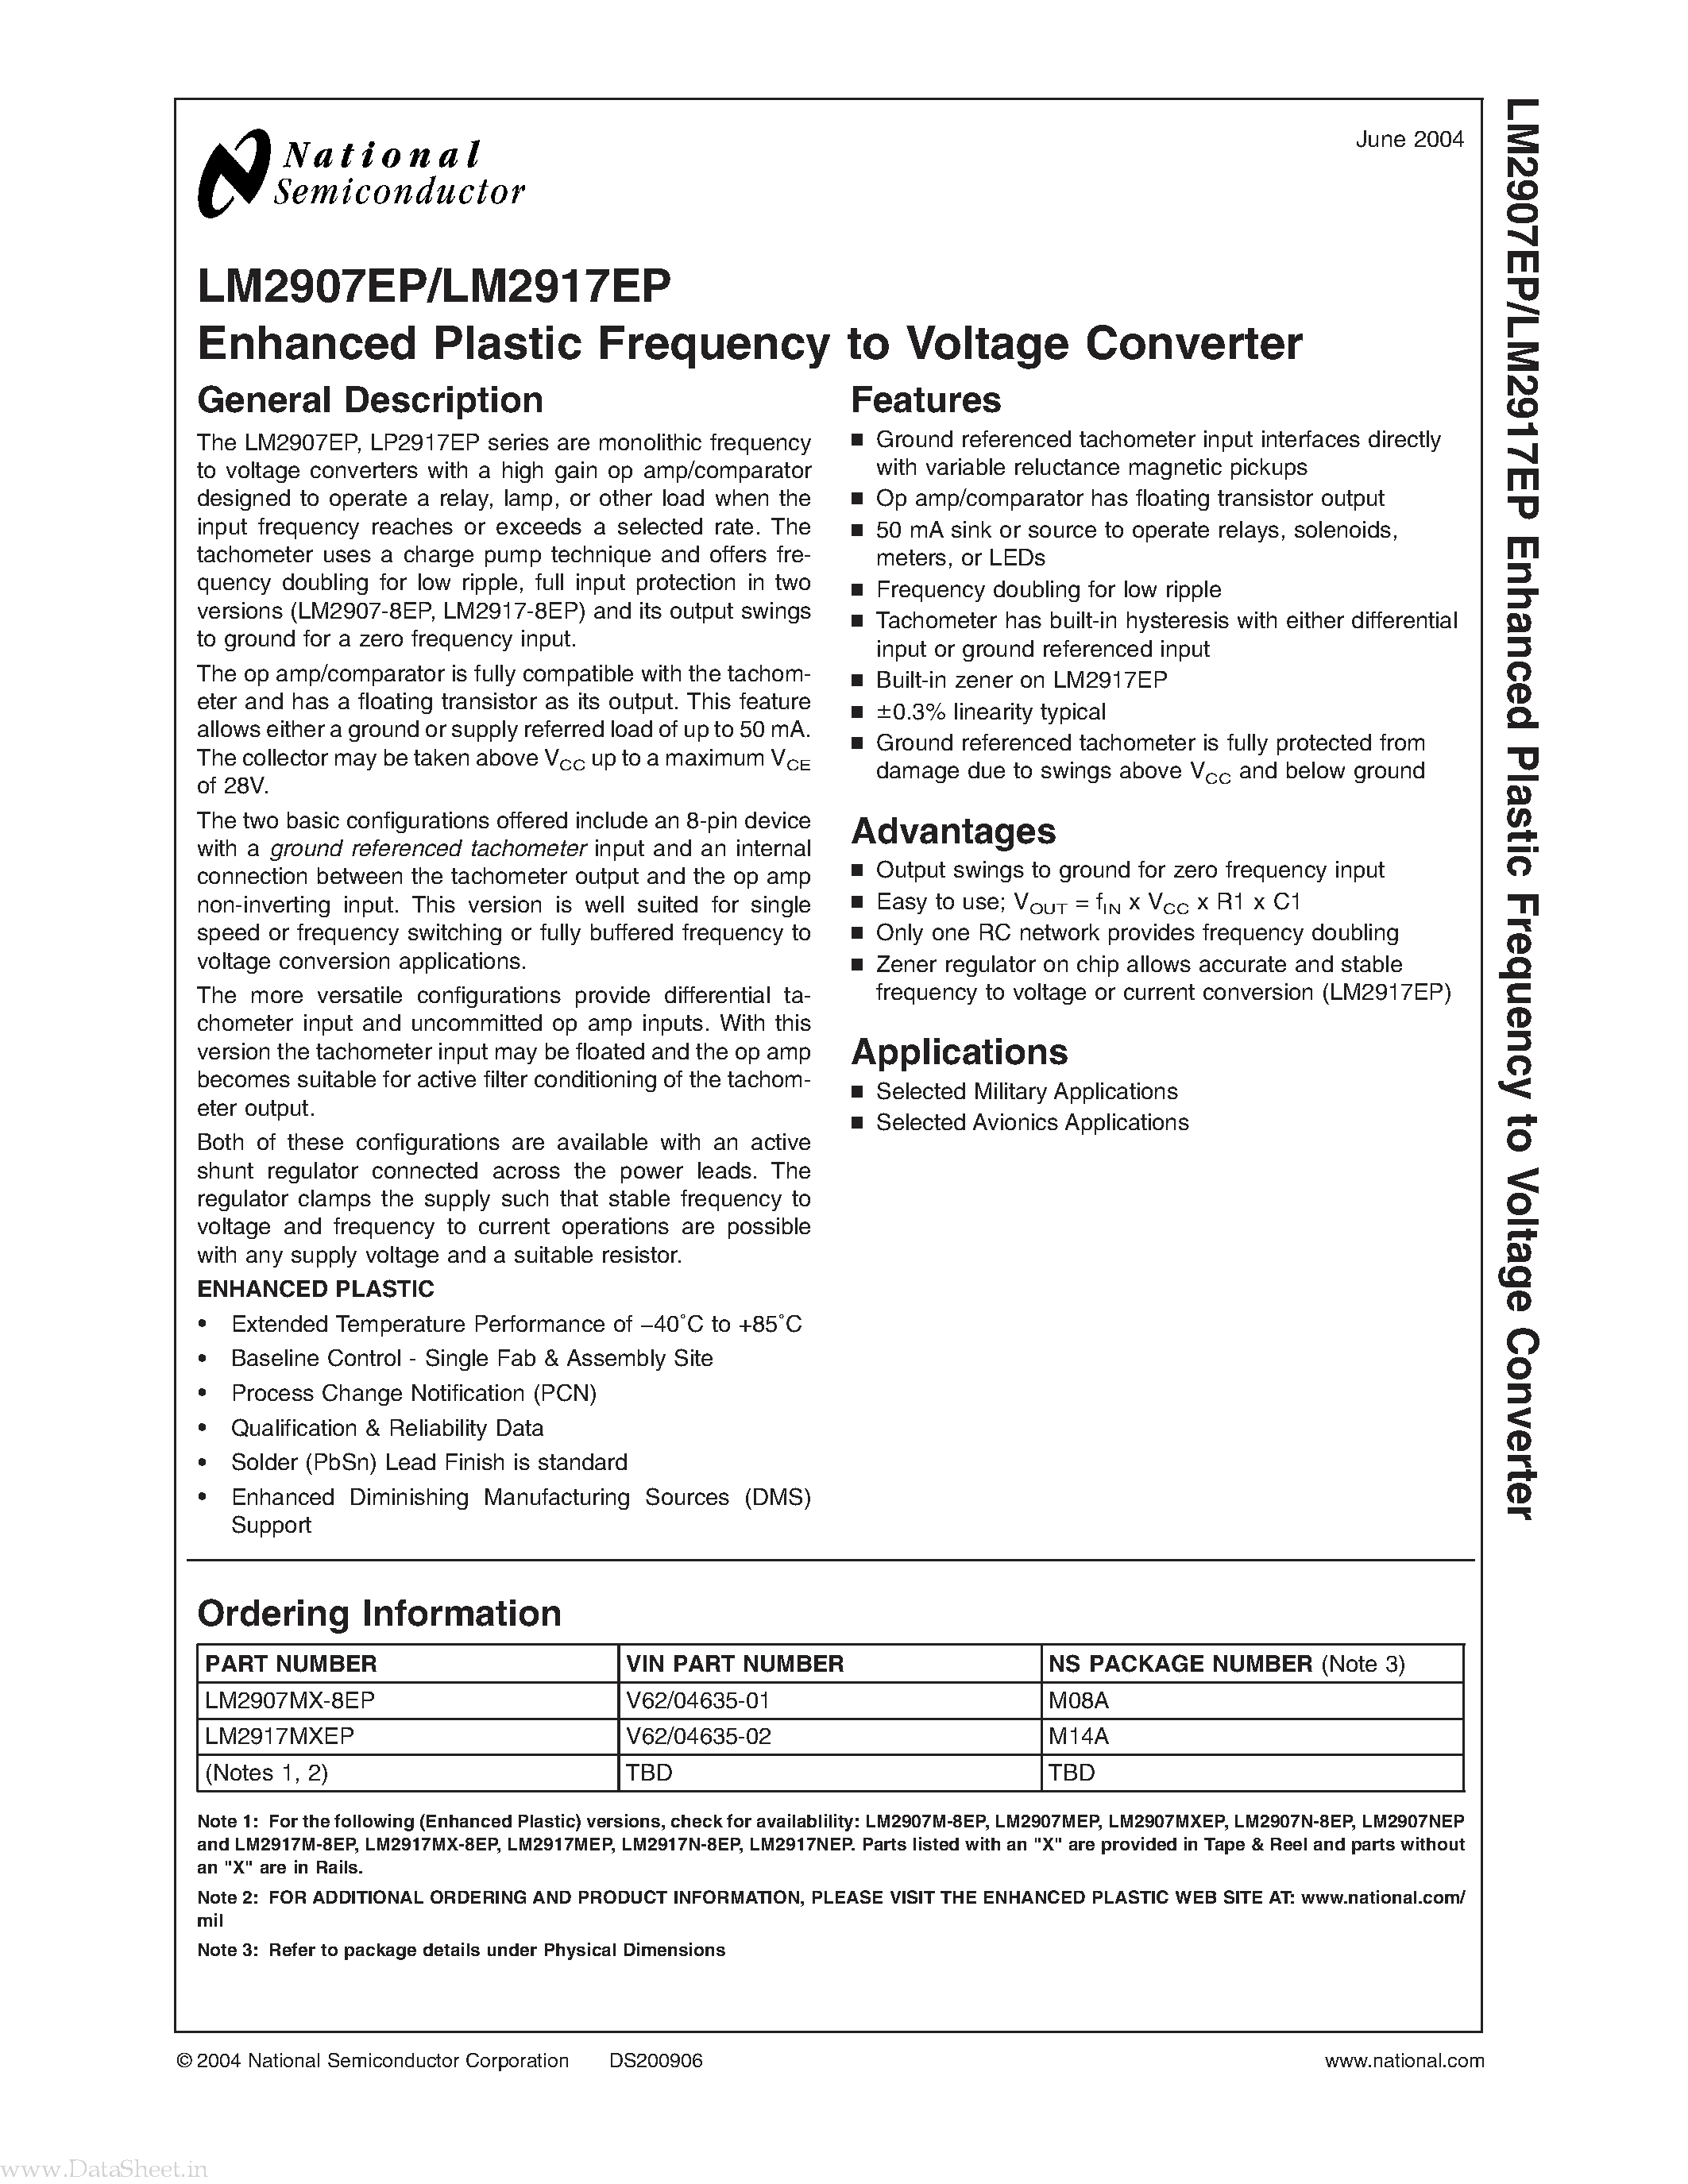 Datasheet LM2907EP - (LM2907EP / LM2917EP) Enhanced Plastic Frequency to Voltage Converter page 1